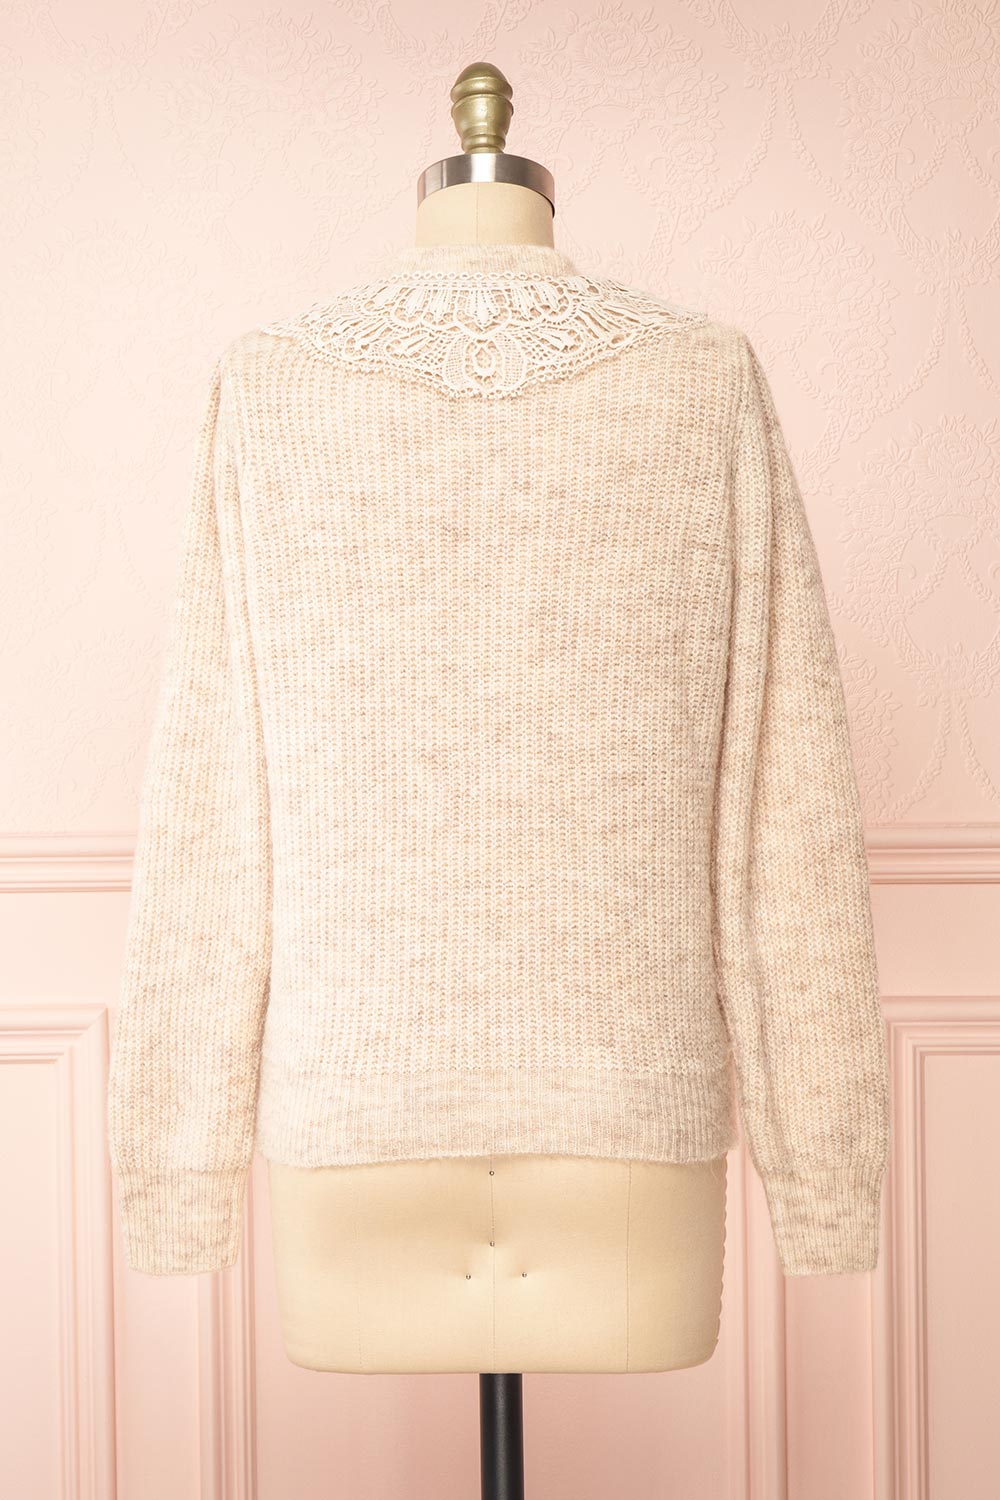 Reagan Beige Buttoned Collar Sweater w/ Lace | Boutique 1861 back view